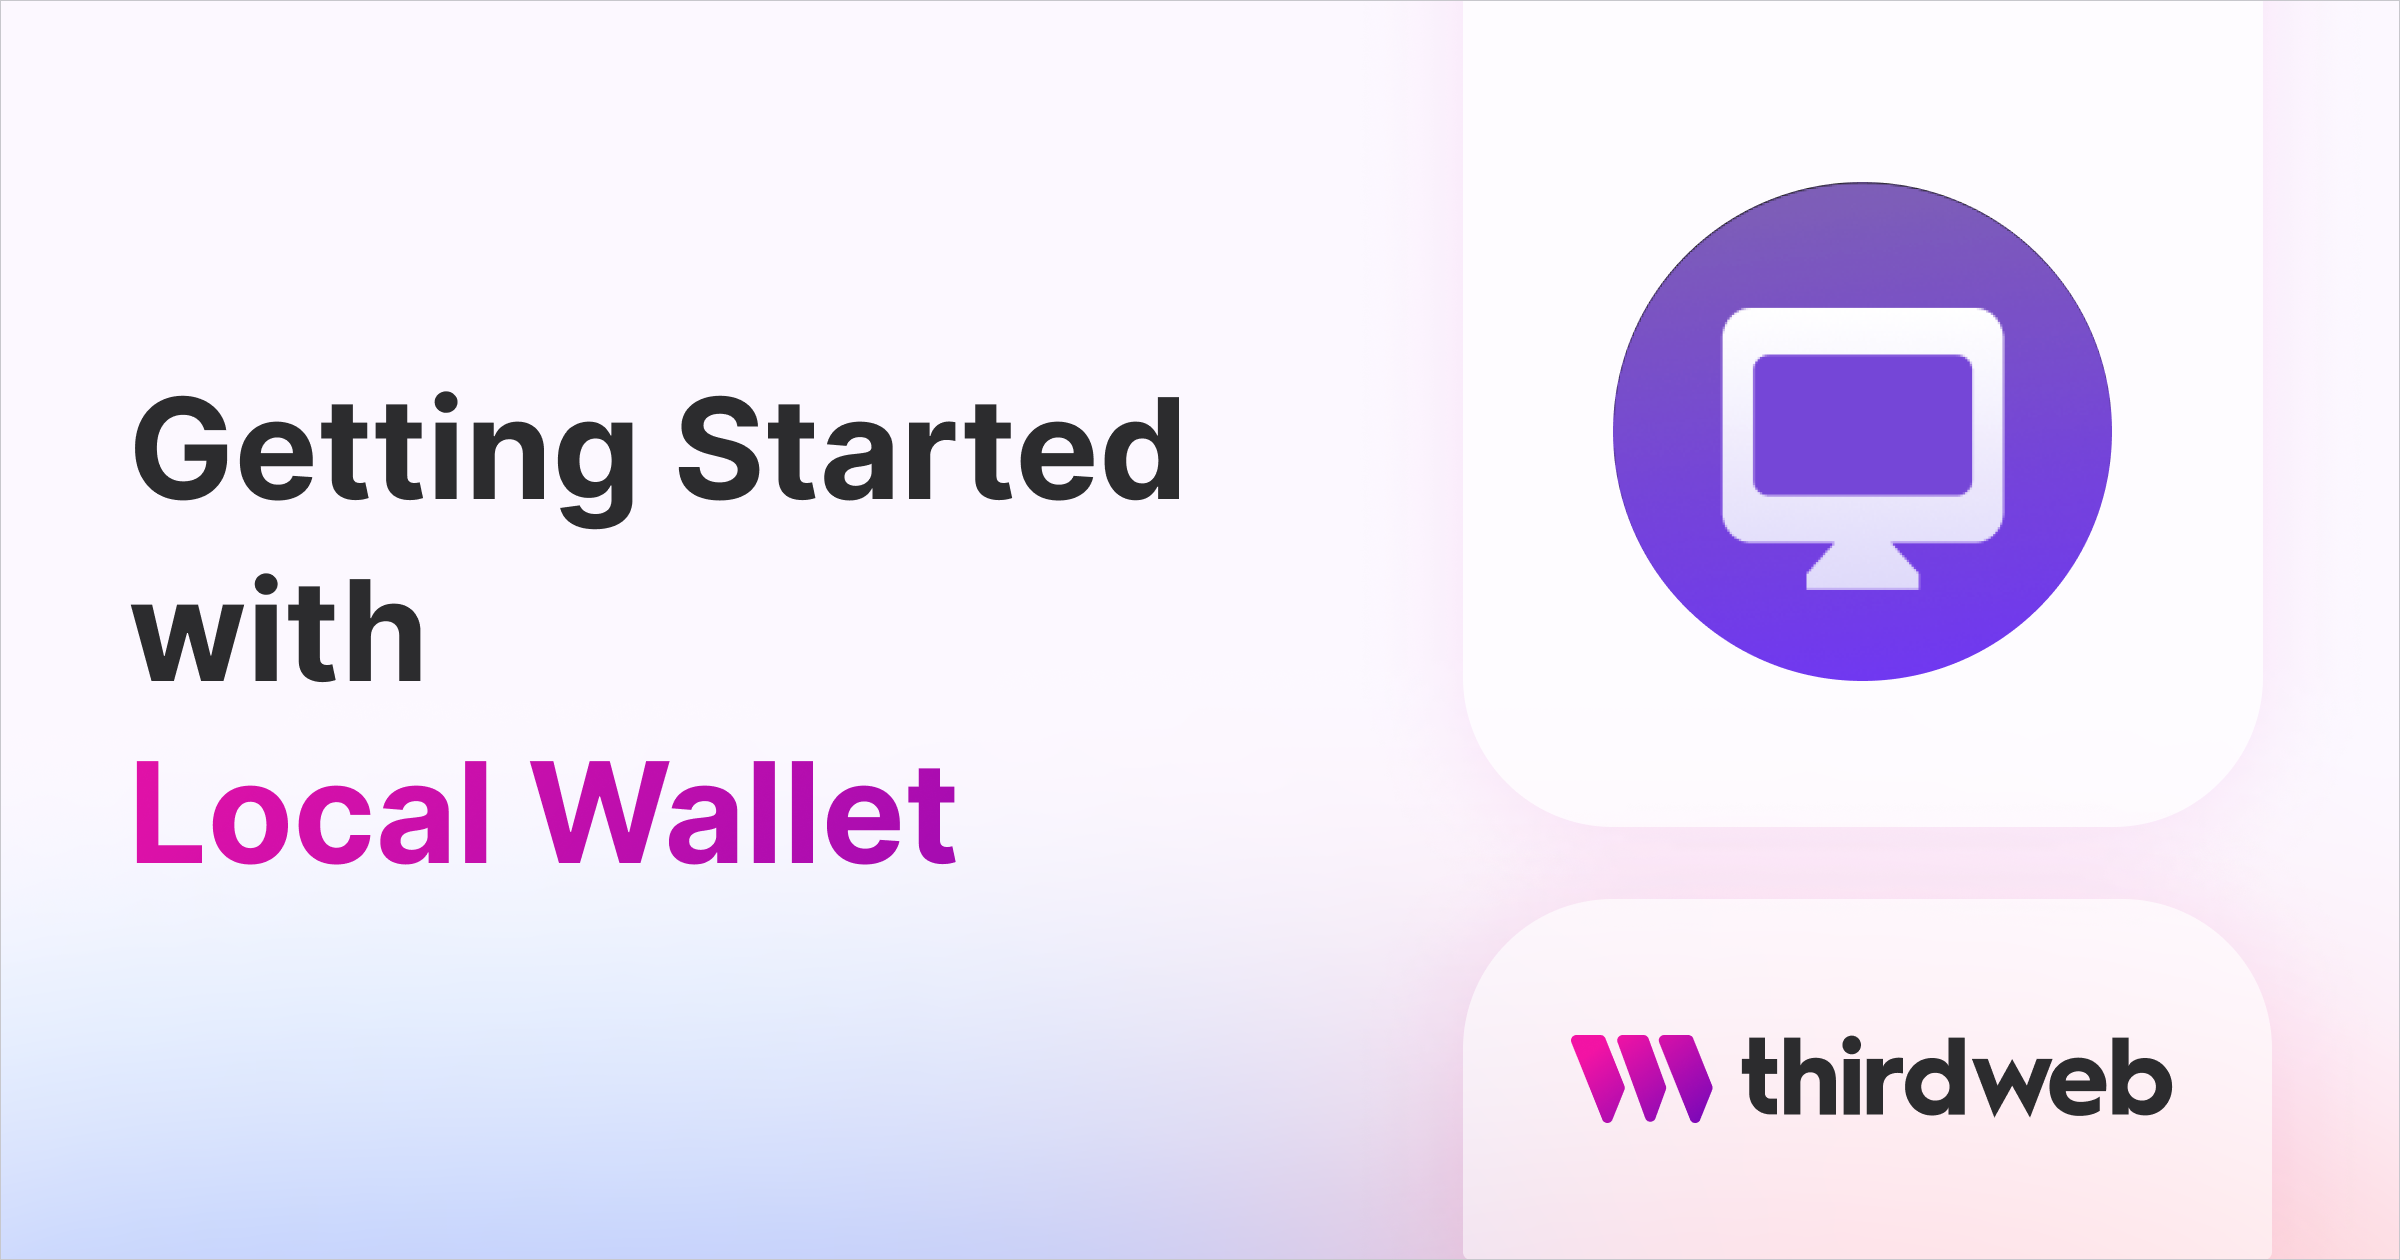 Getting Started with Local Wallet